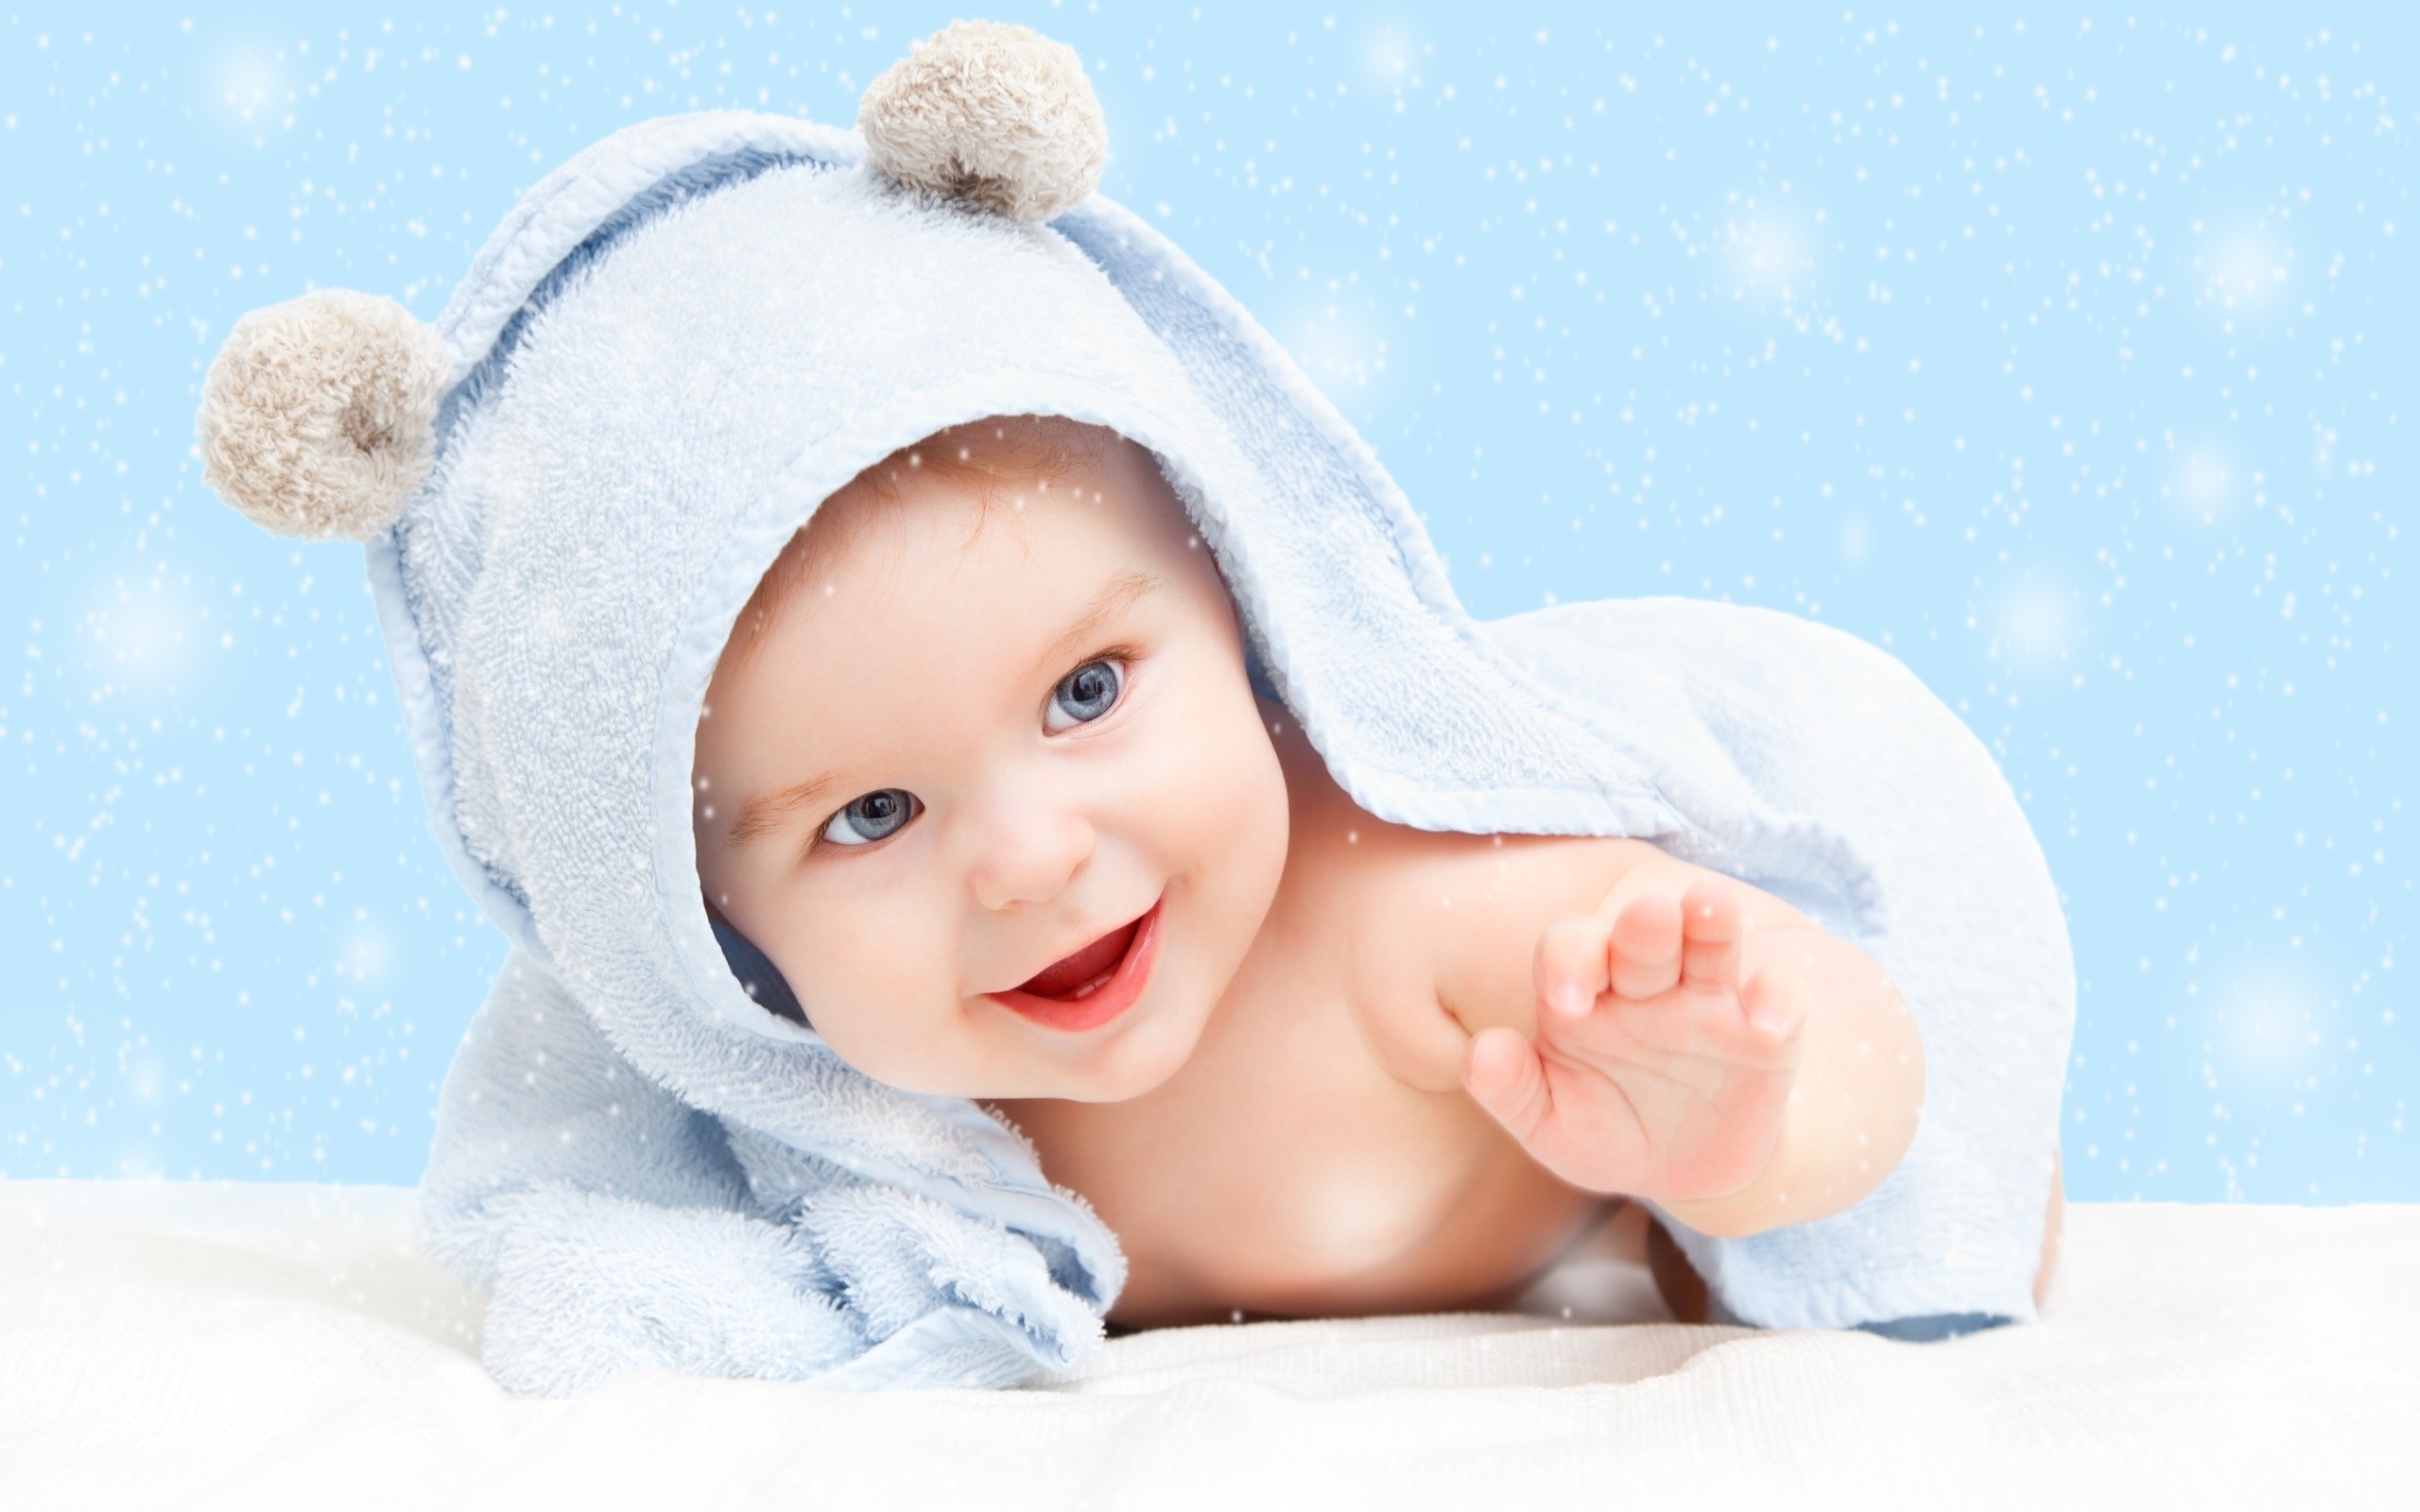 2560x1600 20 Cute Baby Wallpapers New :: Cute Baby Hd Wallpapers